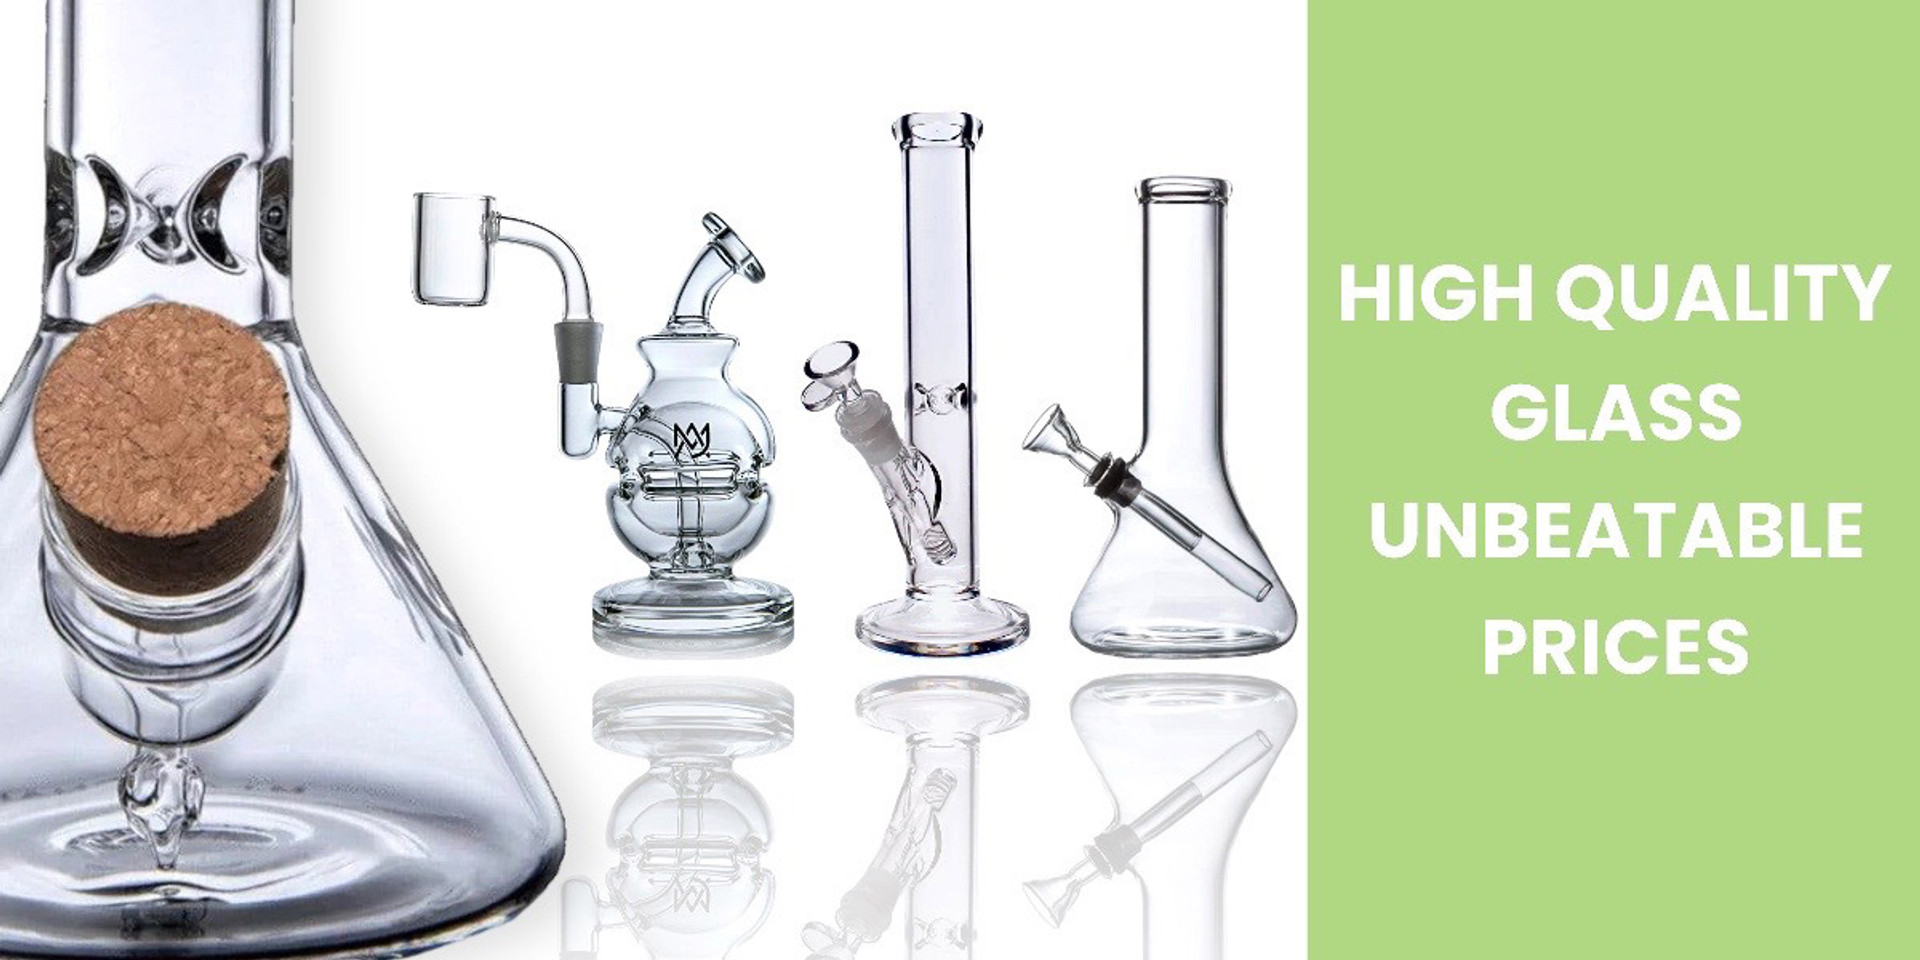 High Quality Glass At Unbeatable Prices